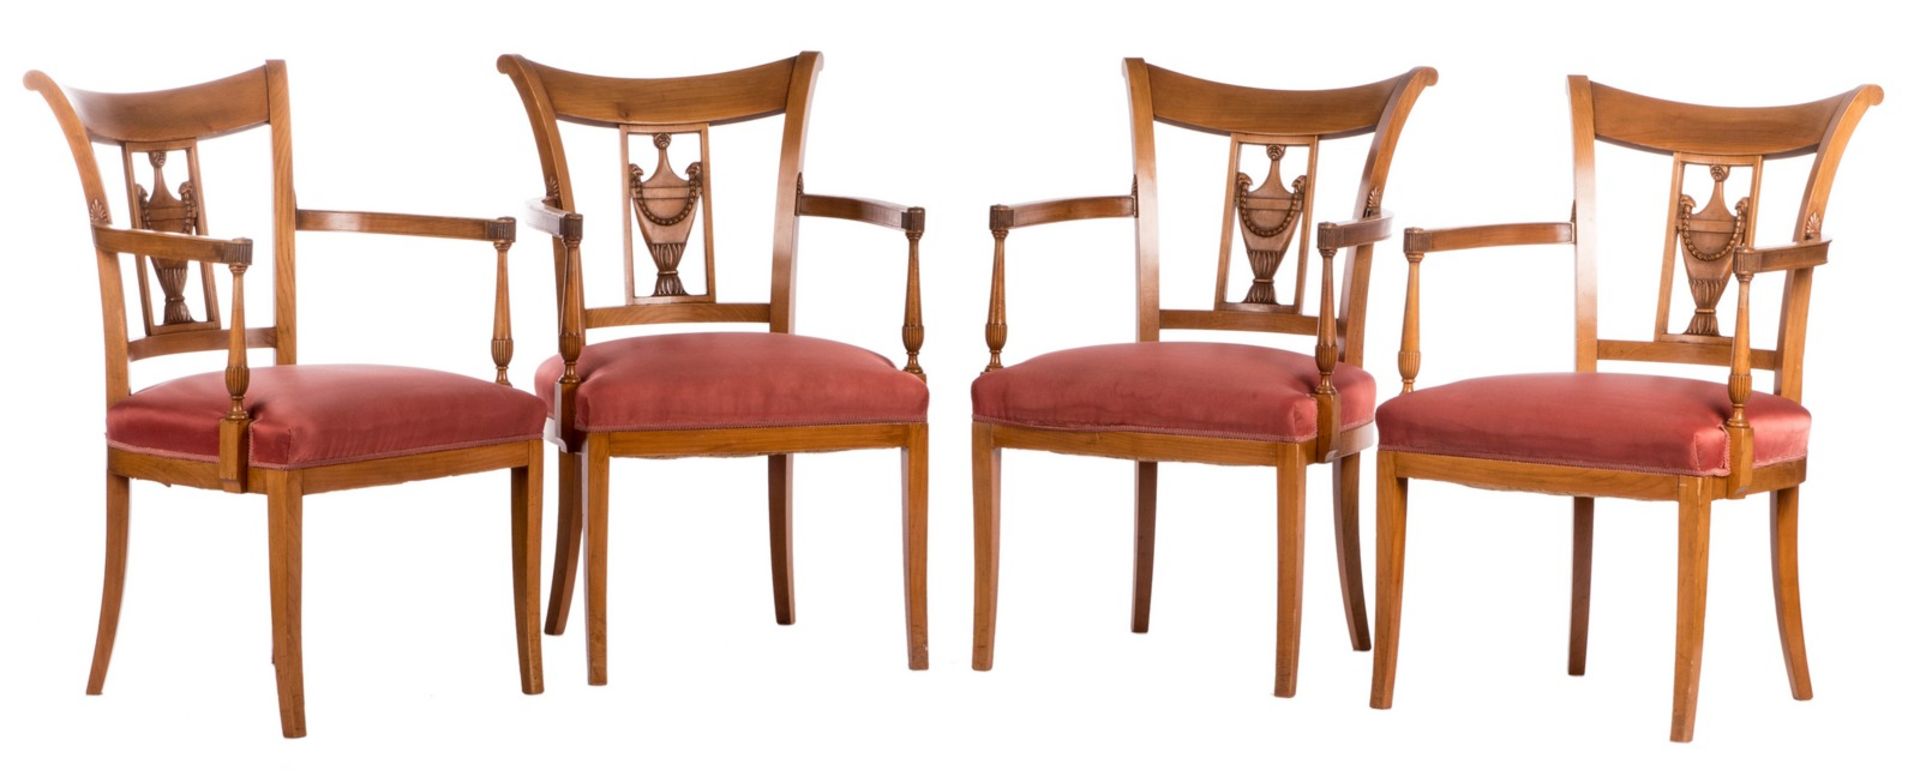 Aa set of four French directoire style cherrywood armchairs, H 88,5 - W 56 - D 59,5 cm